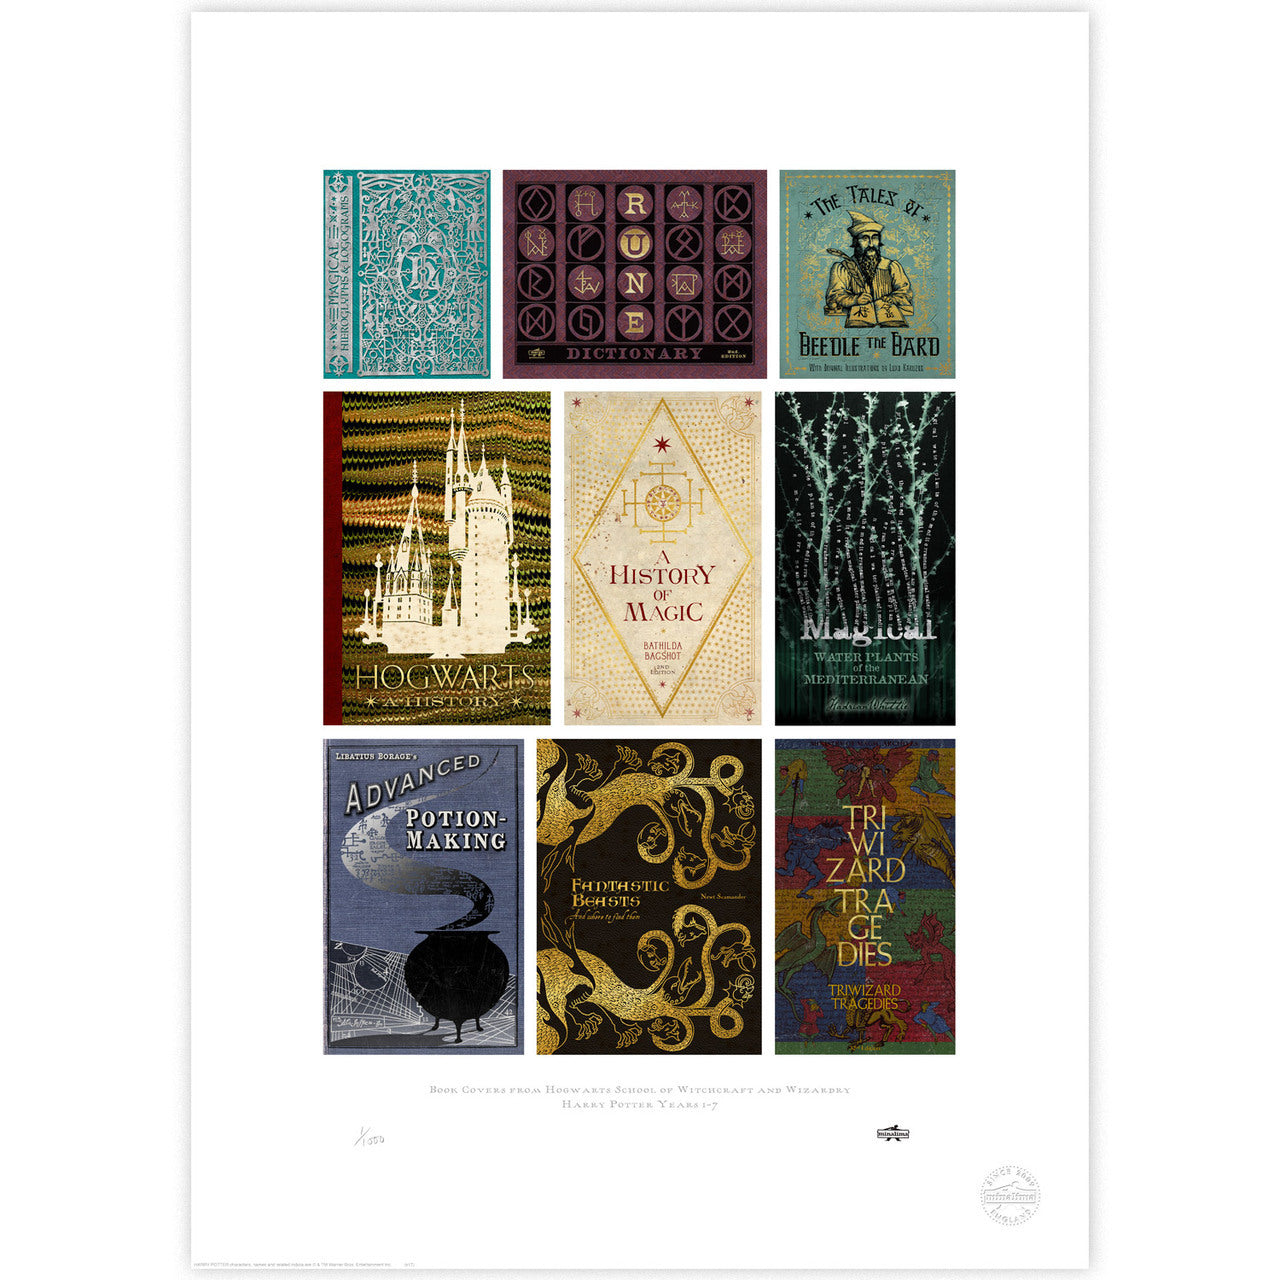 Hogwarts Book Covers Compilation Limited Edition Art Print